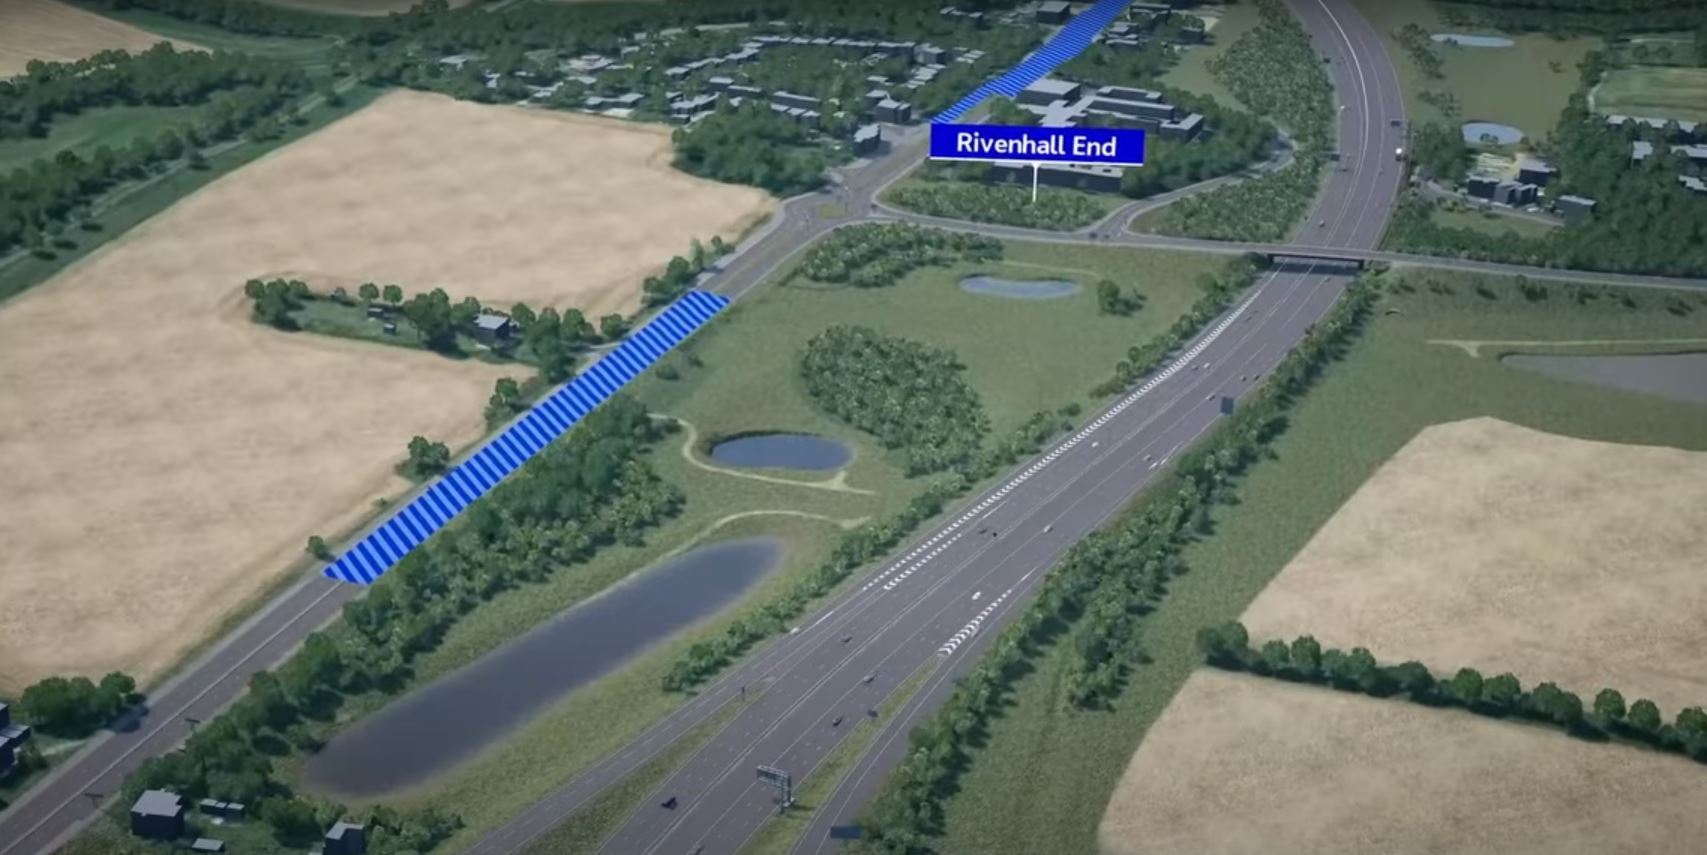 At the new junction 22 a new bypass will be created with three lanes in each direction. The existing A12 will become a local road and subject to further engagement handed back to Essex County Council